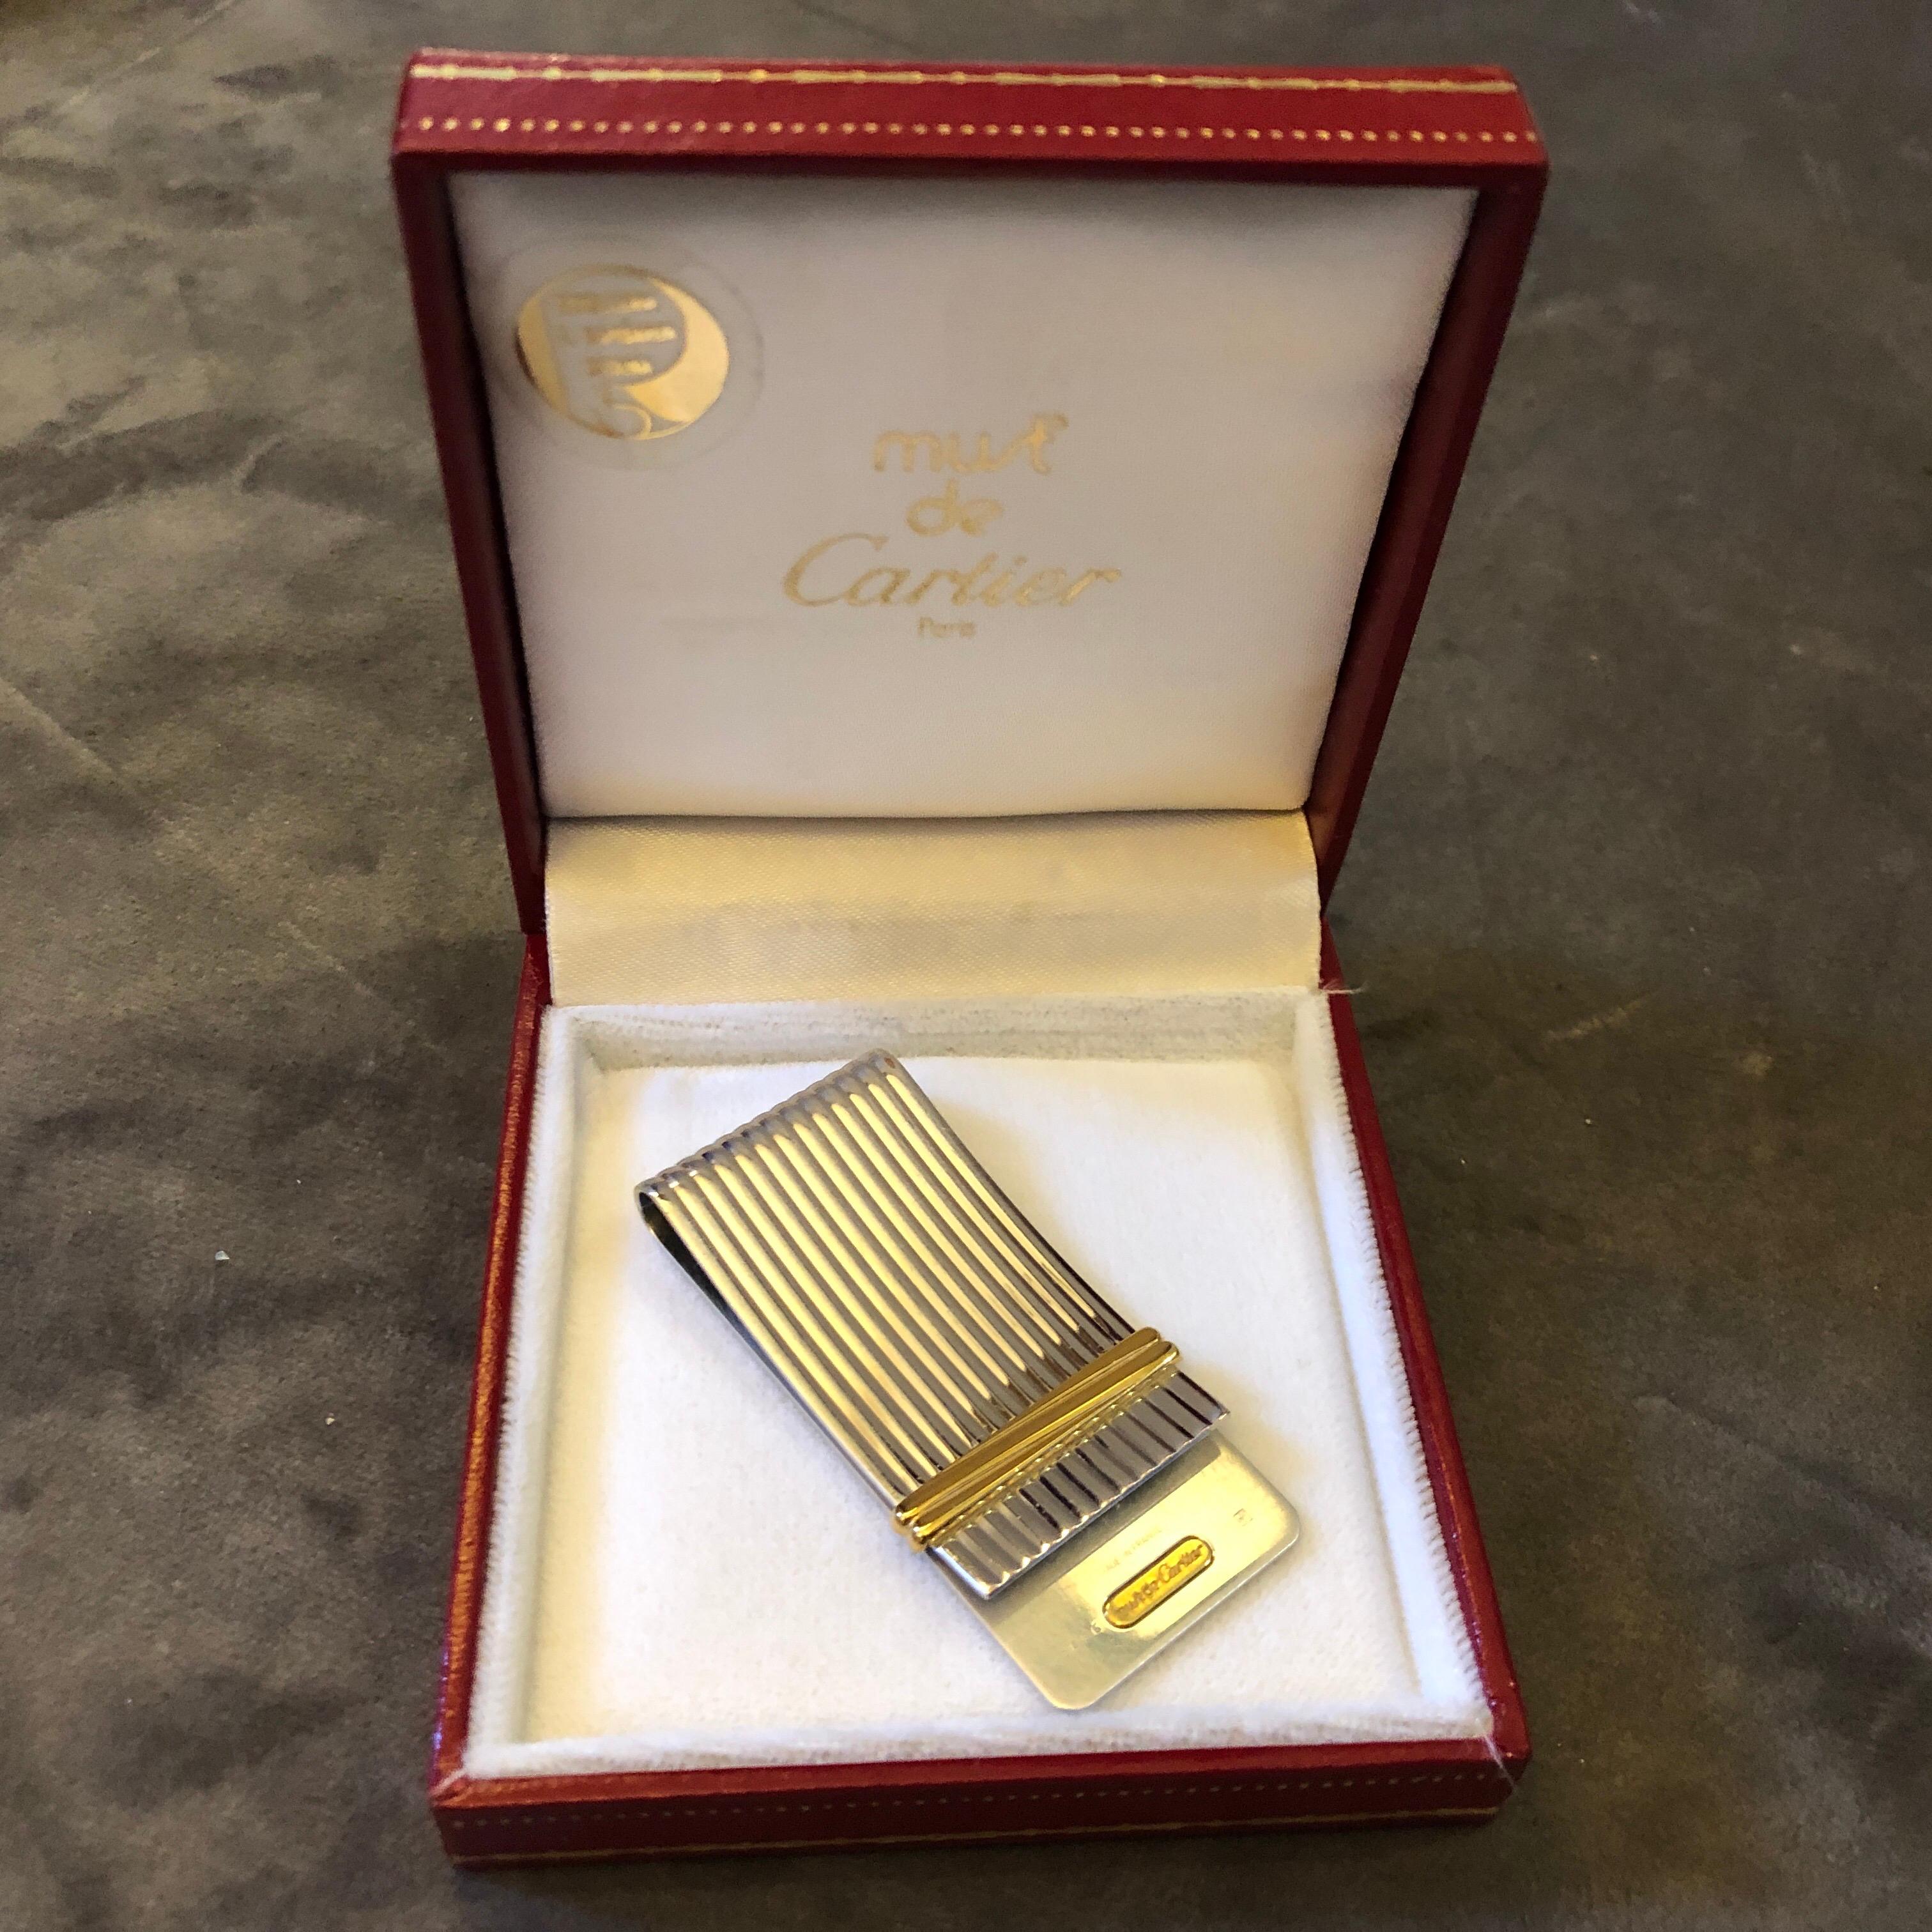 A money clips signed Cartier in the original box. It's in lovely conditions, probably never used.